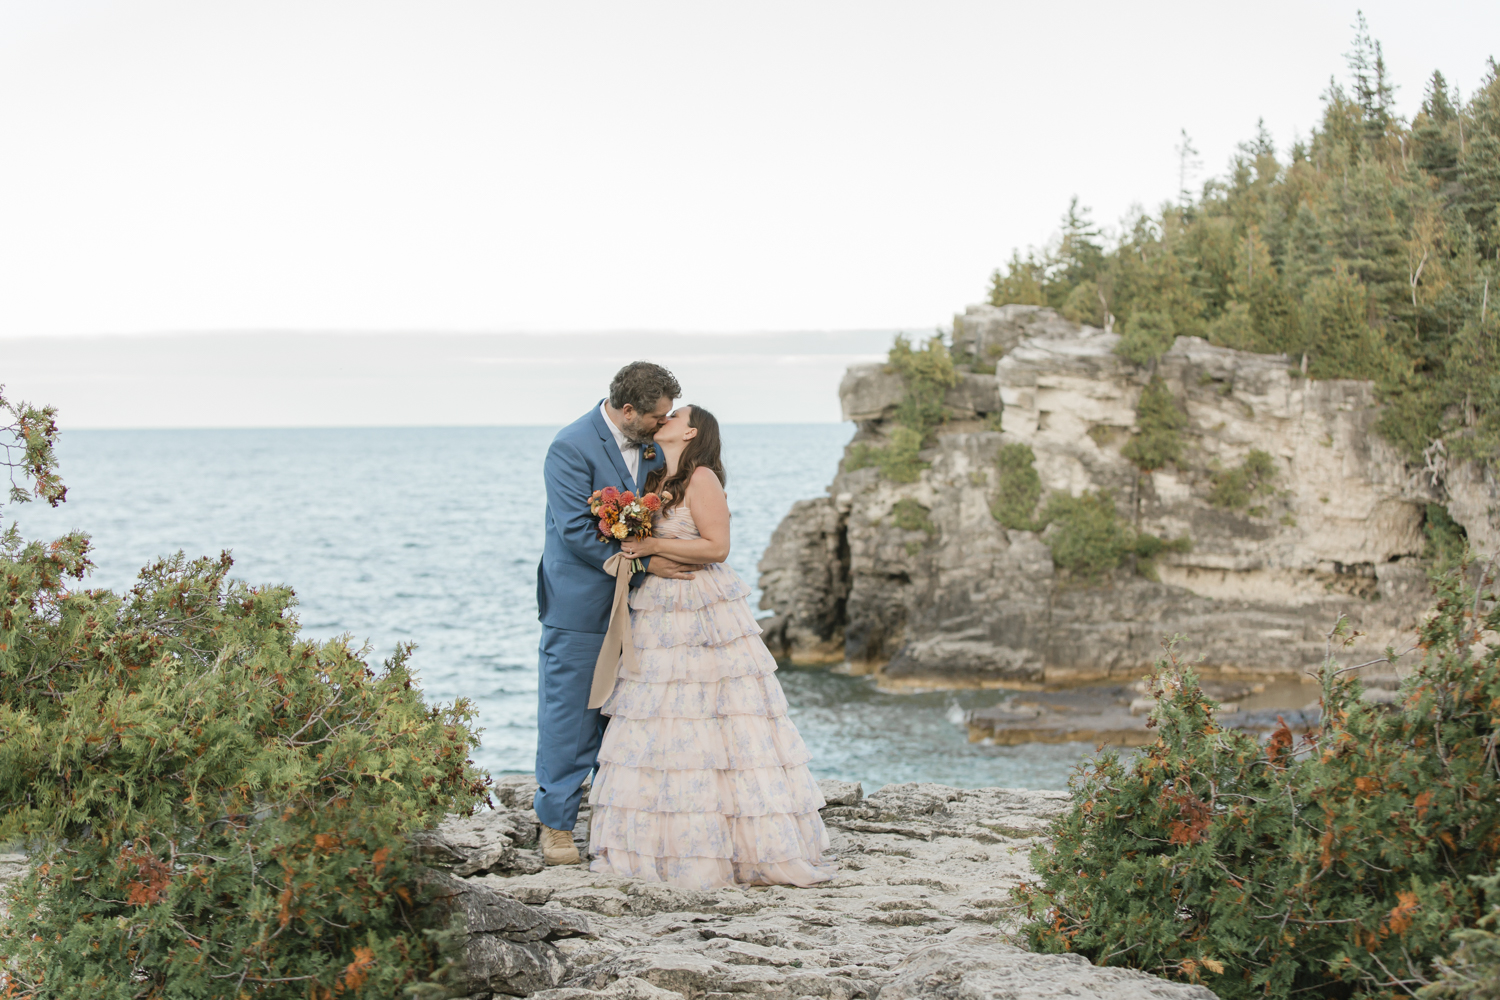 A couple kissing after their elopement ceremony at Bruce Peninsula National Park